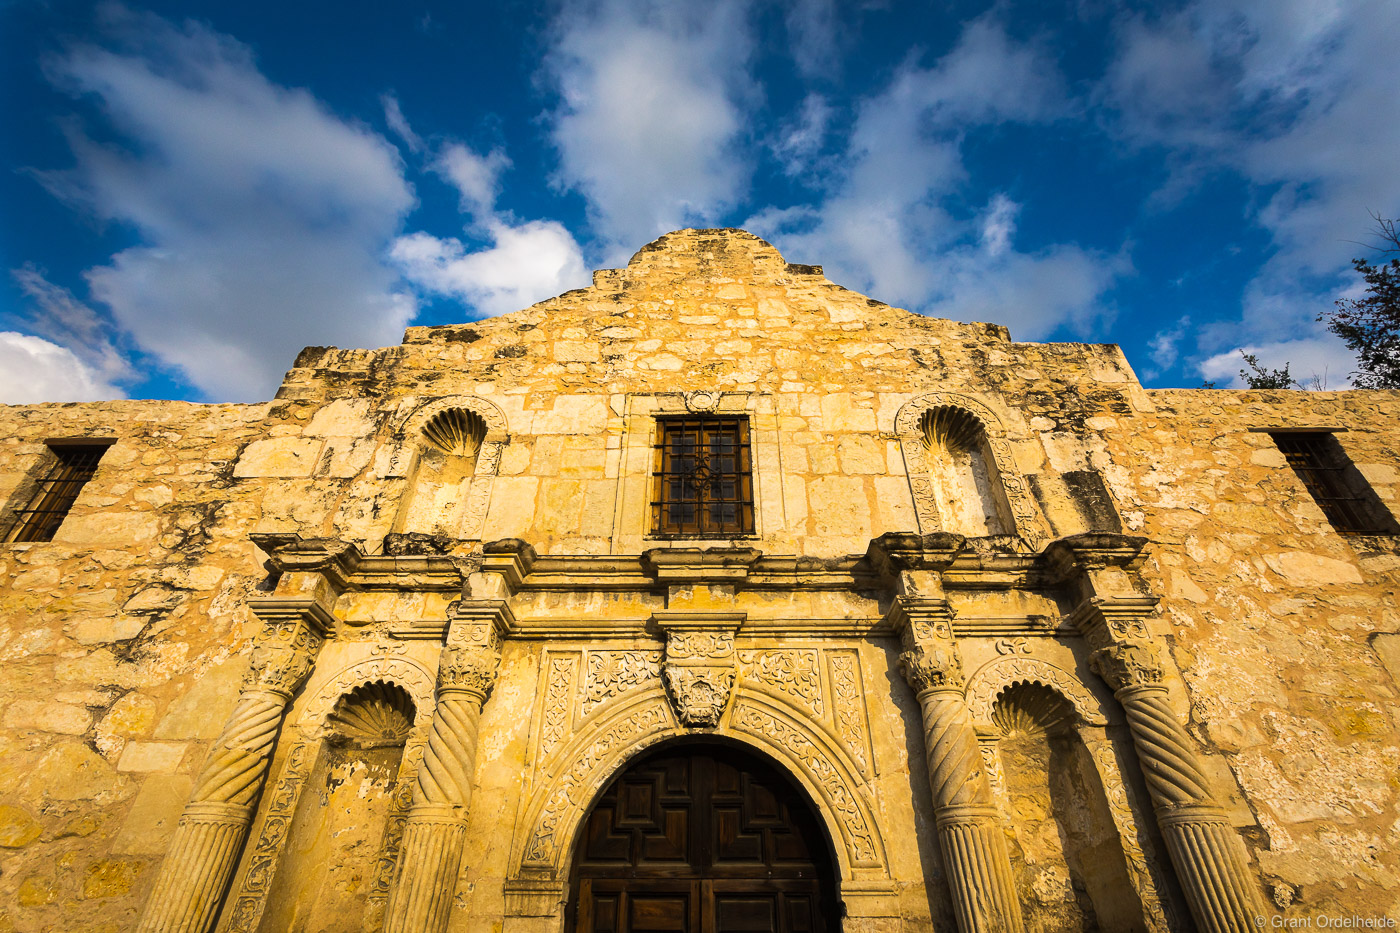 The iconic Alamo mission and historical battle site in downtown San Antonio Texas.